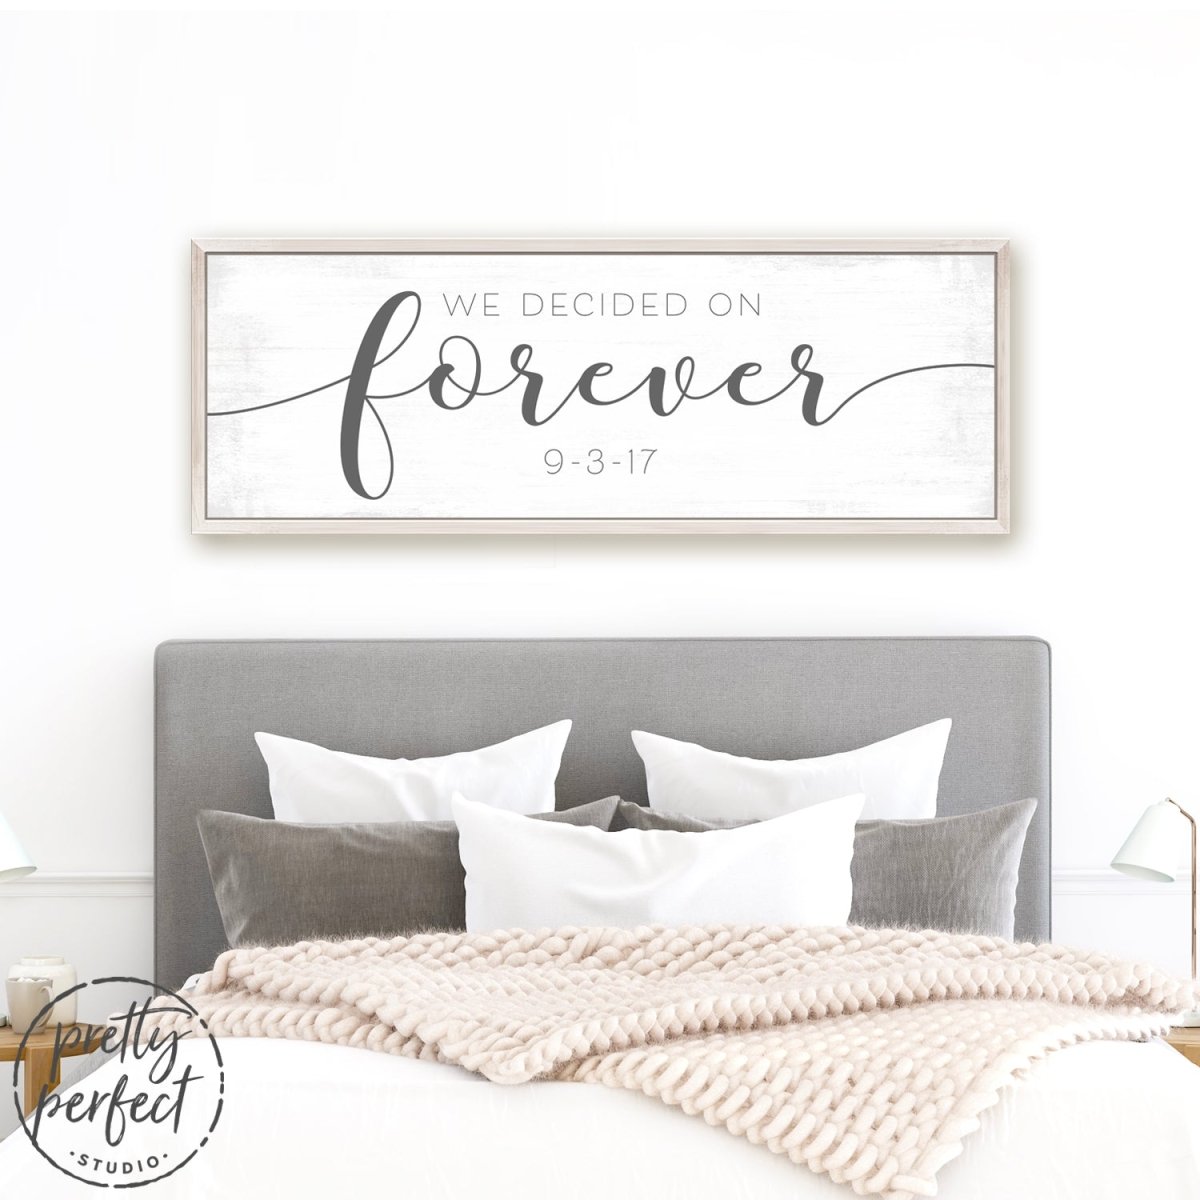 We Decided On Forever - Personalized Wedding Date Sign Over Bed In Master Bedroom - Pretty Perfect Studio